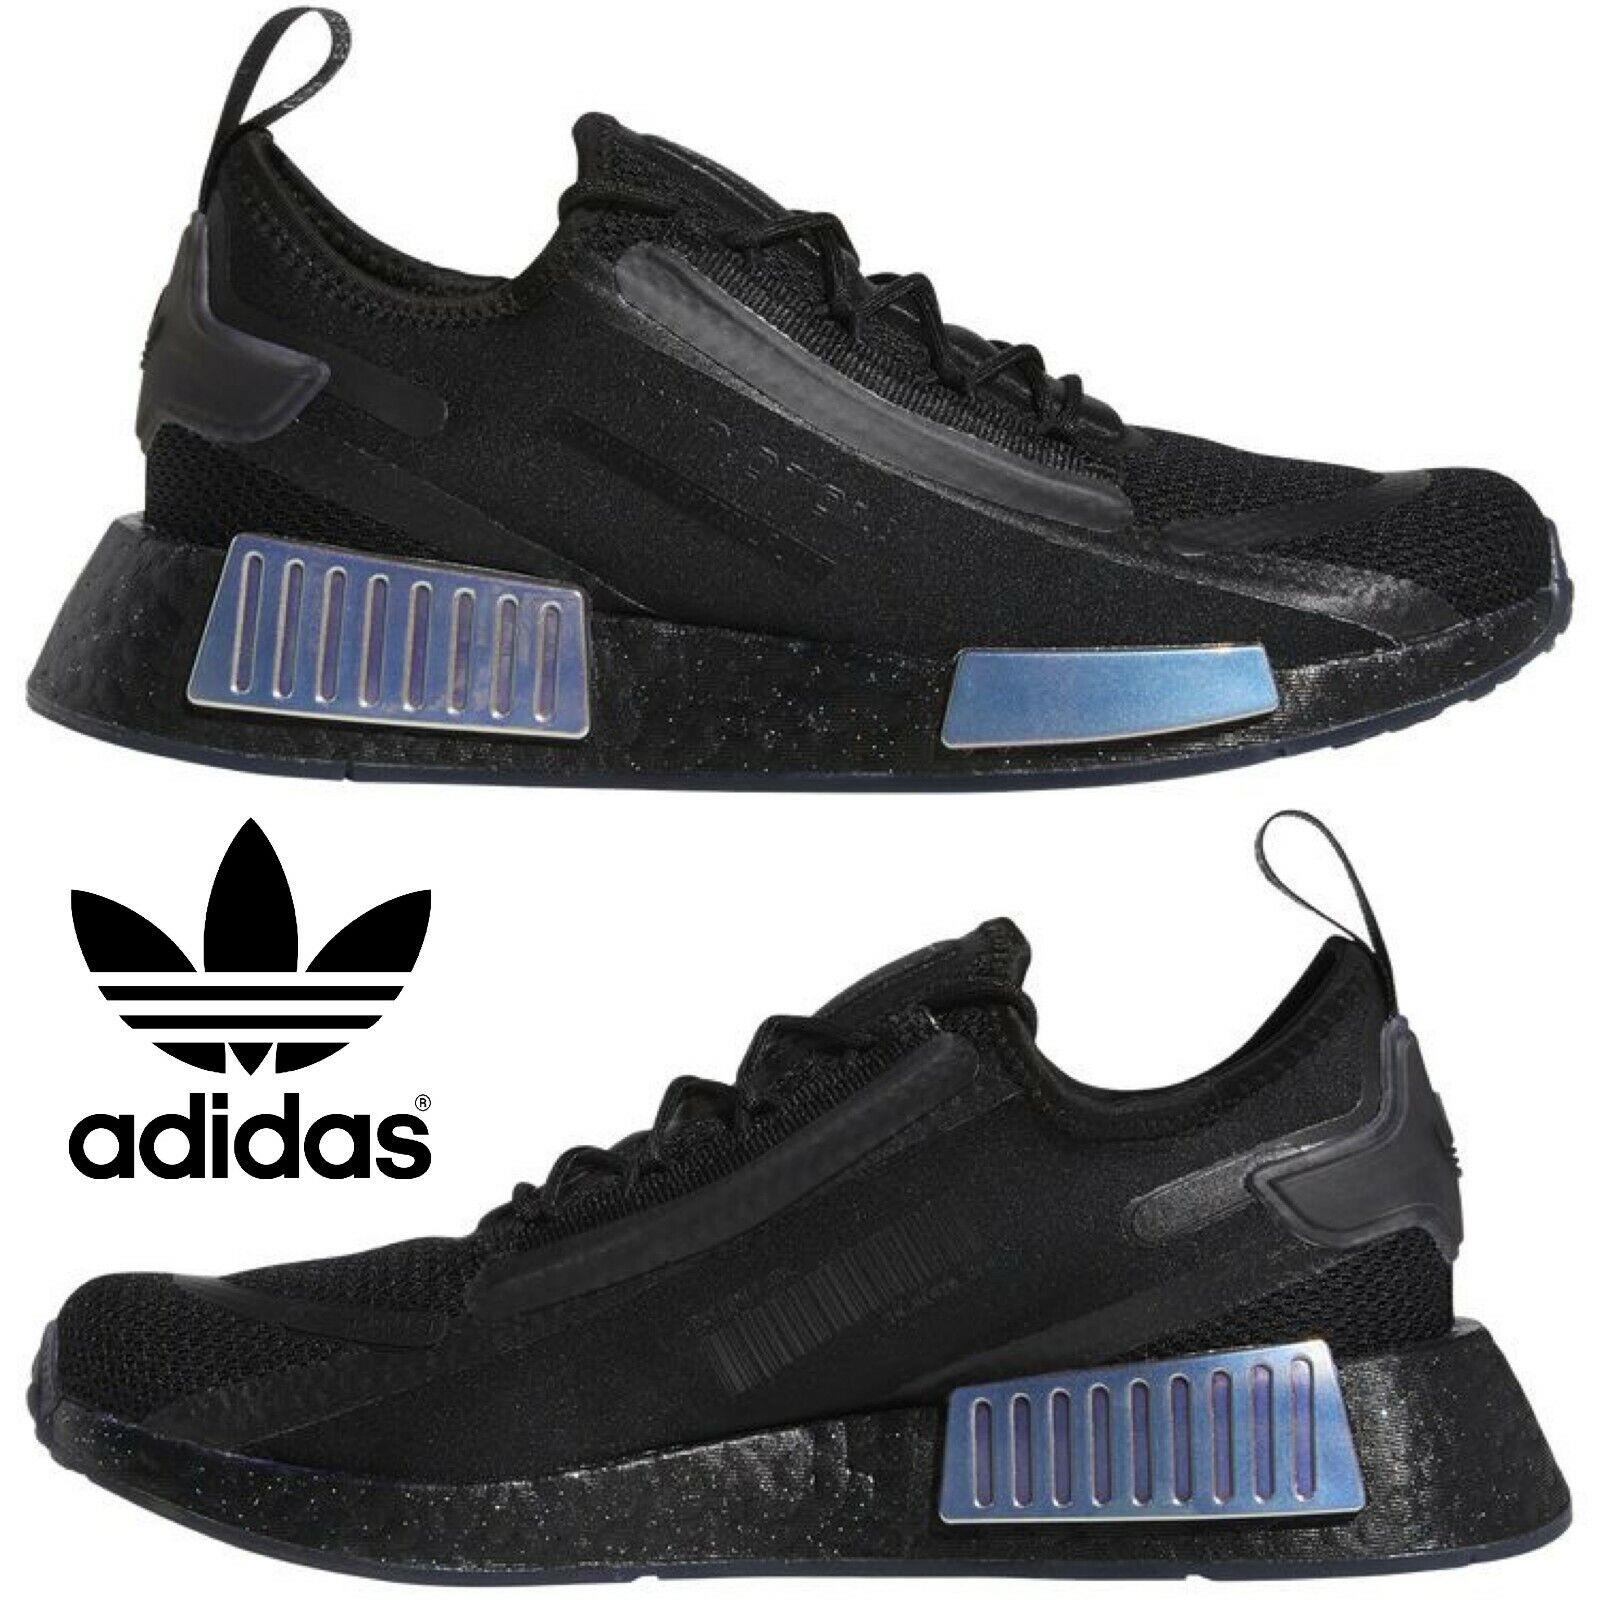 Adidas Originals Nmd R1 Casual Shoes Women s Sneakers Sport Gym Running Black